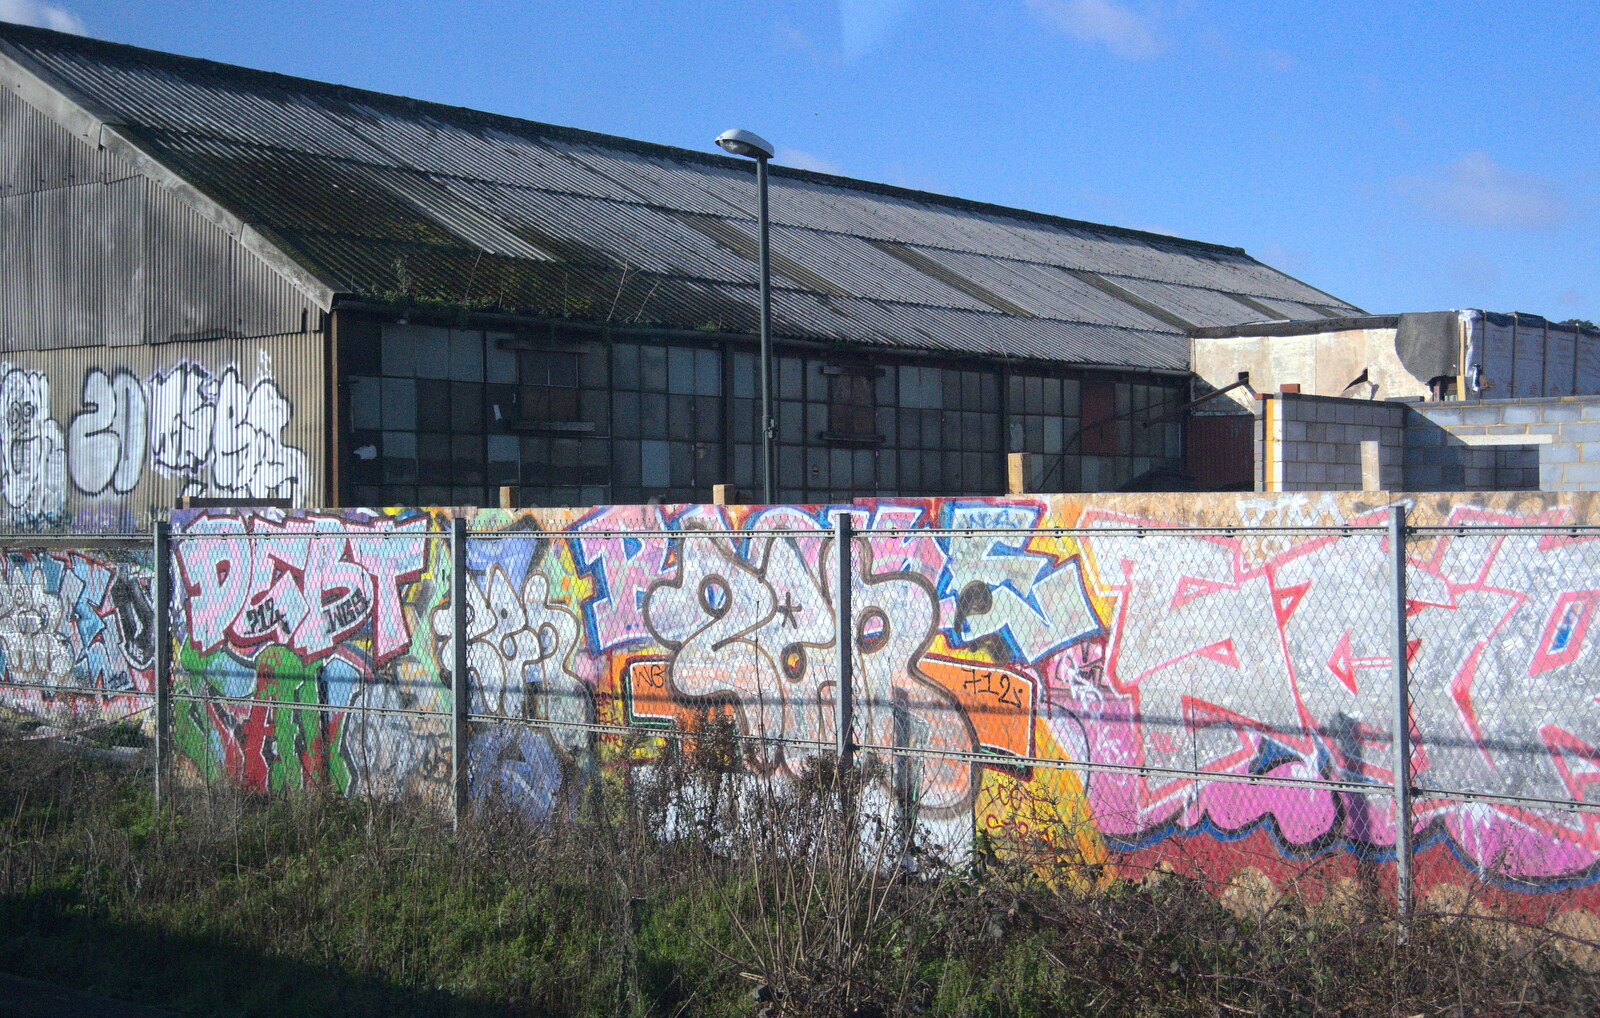 More track-side graffiti from A Wintry Trip Down South, Walkford, Dorset - 1st February 2019